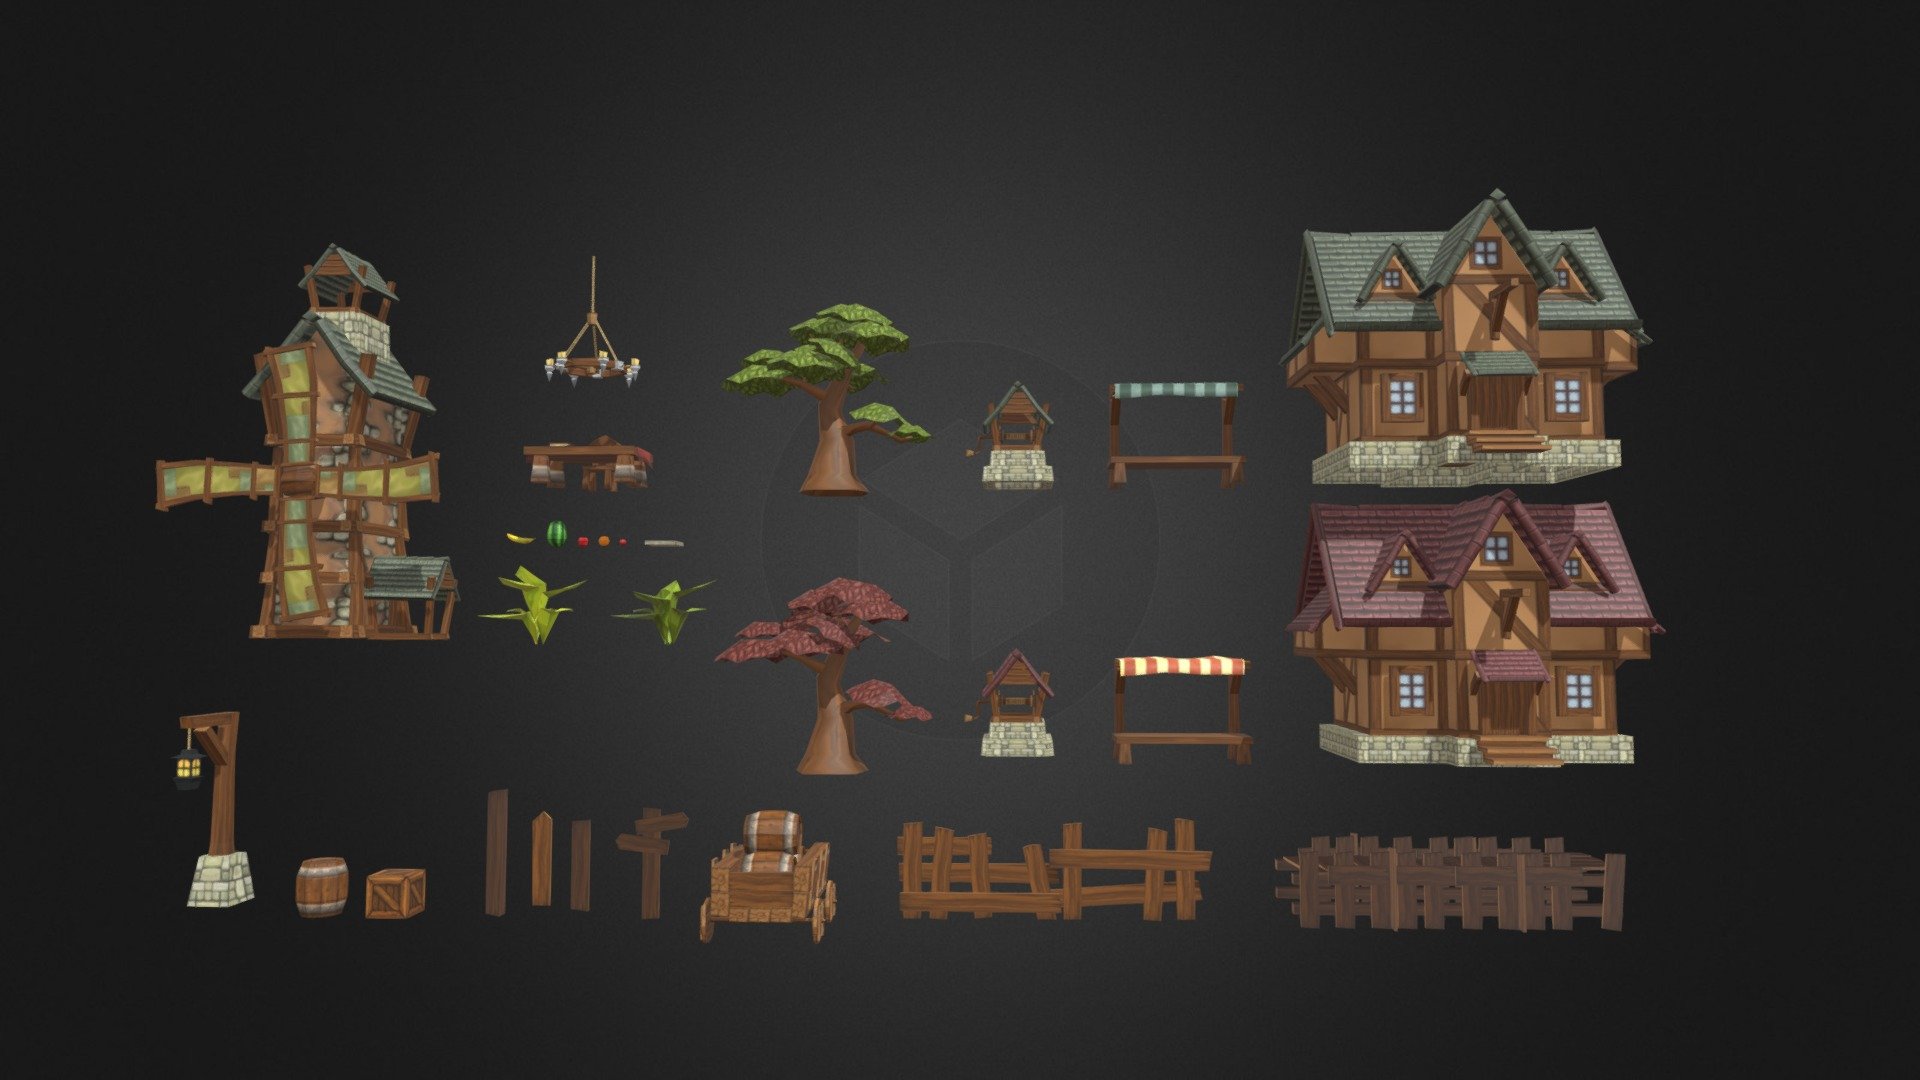 Liso Library 1 is the first of many bundles of low-poly and hand-painted game assets. The goal is to provide you a wide array of varied game assets and props to be used in setting up your game world or environment. For this initial bundle, this is a mixture of assets that is medieval/village themed for an RPG game. All Assets are render-ready for Blender-internal Renderer

What's Inside:




Windmill

Chandelier

2 Trees

2 Houses

2 Wells

2 Vendor Stands

Barrel

Crate

7 Wood Props

2 Plants

5 Fruits

Barrel Carrier

Table and Chair

Book
 - Liso Library 1 - Buy Royalty Free 3D model by bluezald 3d model